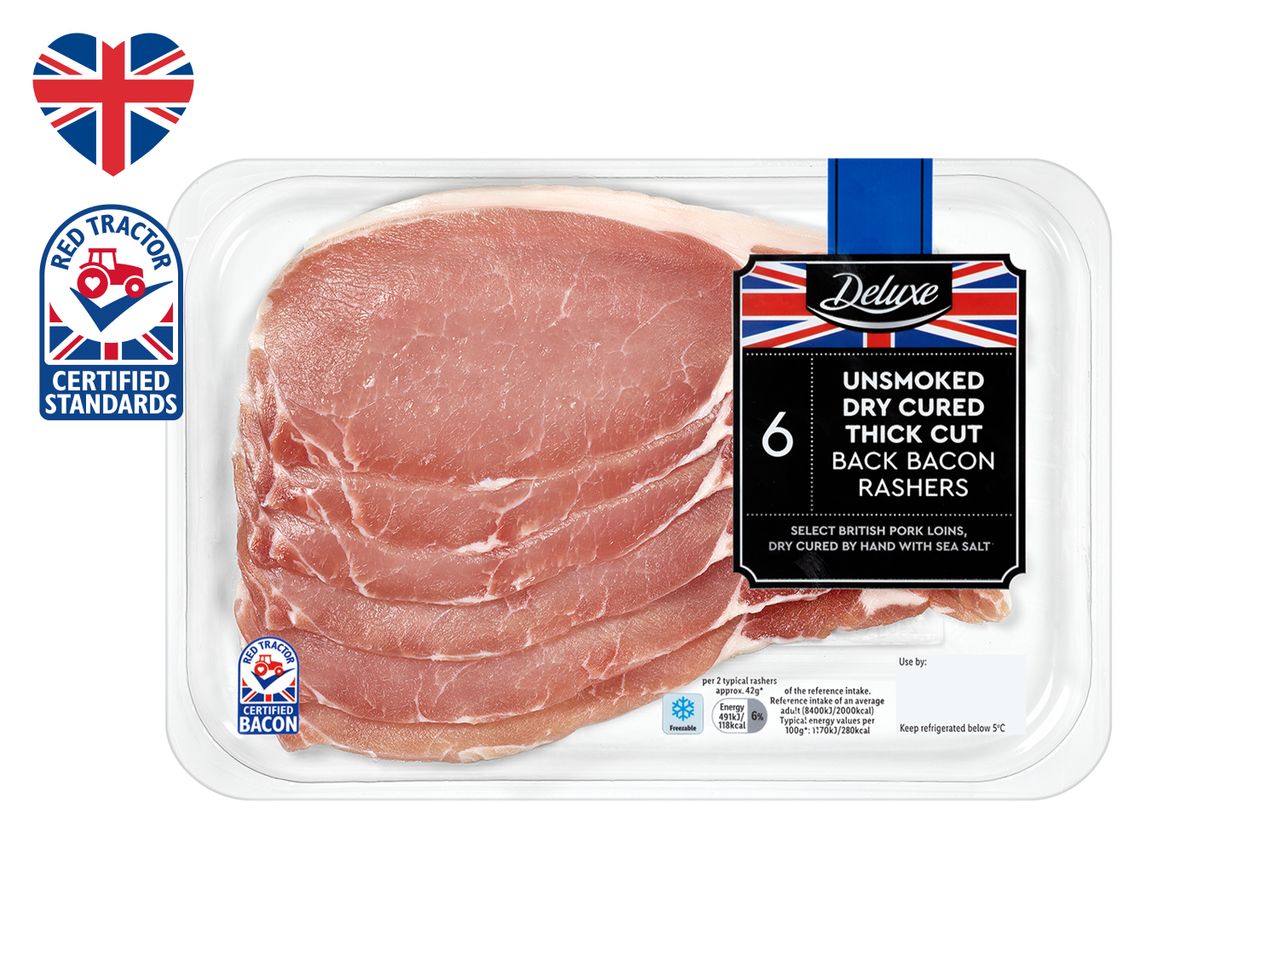 Go to full screen view: Deluxe RSPCA Dry Cured British Back Bacon - Image 2